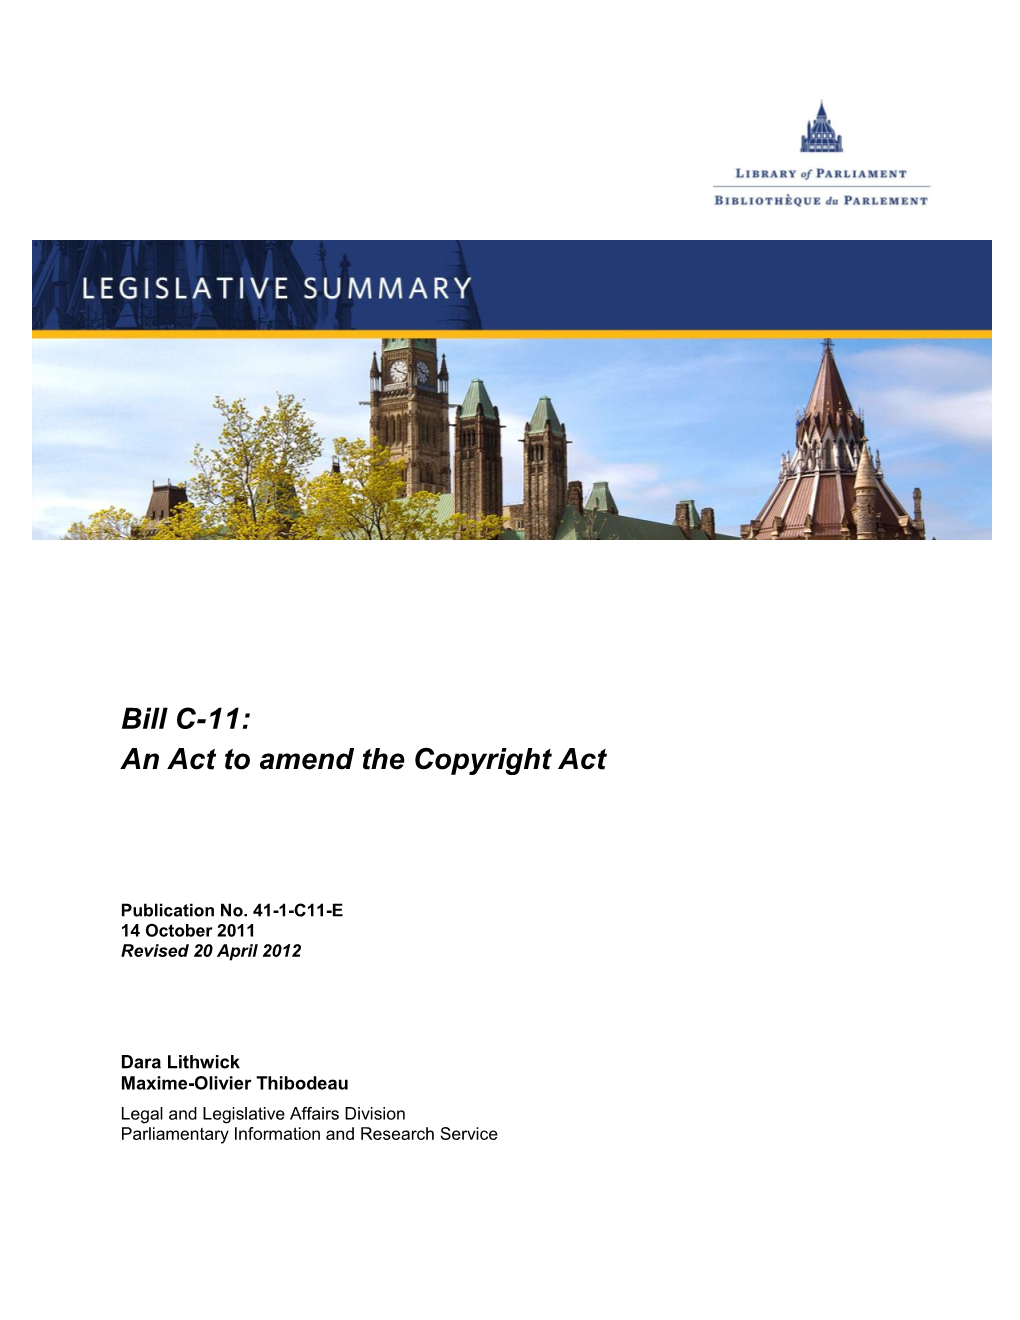 Bill C-11: an Act to Amend the Copyright Act